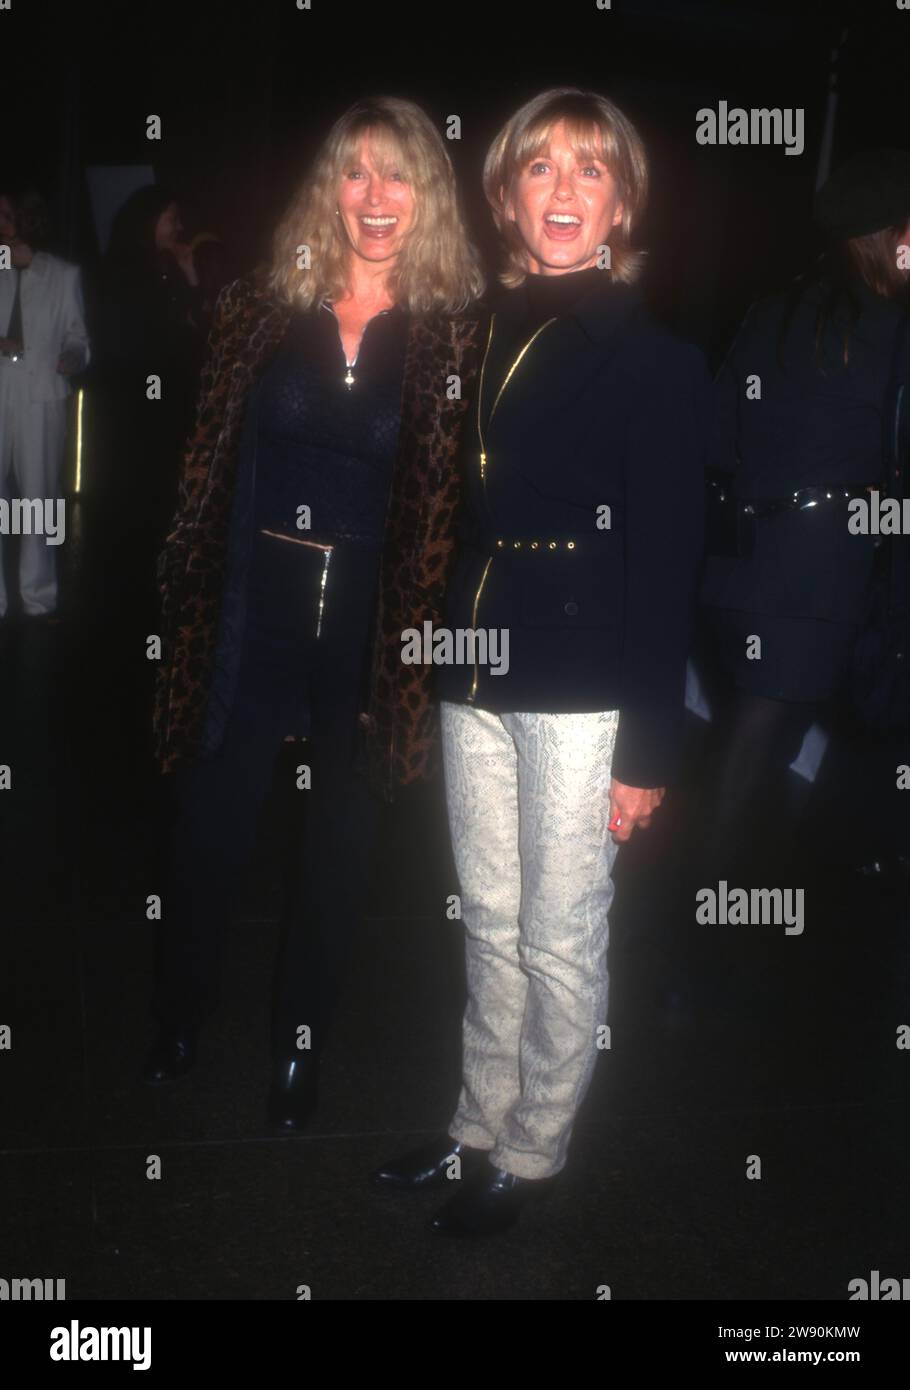 Los Angeles, California, USA 1st October 1996 Actress Rona Newton-John and sister Singer Olivia Newton-John attend HBOÕs If These Walls Could Talk Premiere at DirectorÕs Guild of America on October 1, 1996 in Los Angeles, California, USA. Photo by Barry King/Alamy Stock Photo Stock Photo